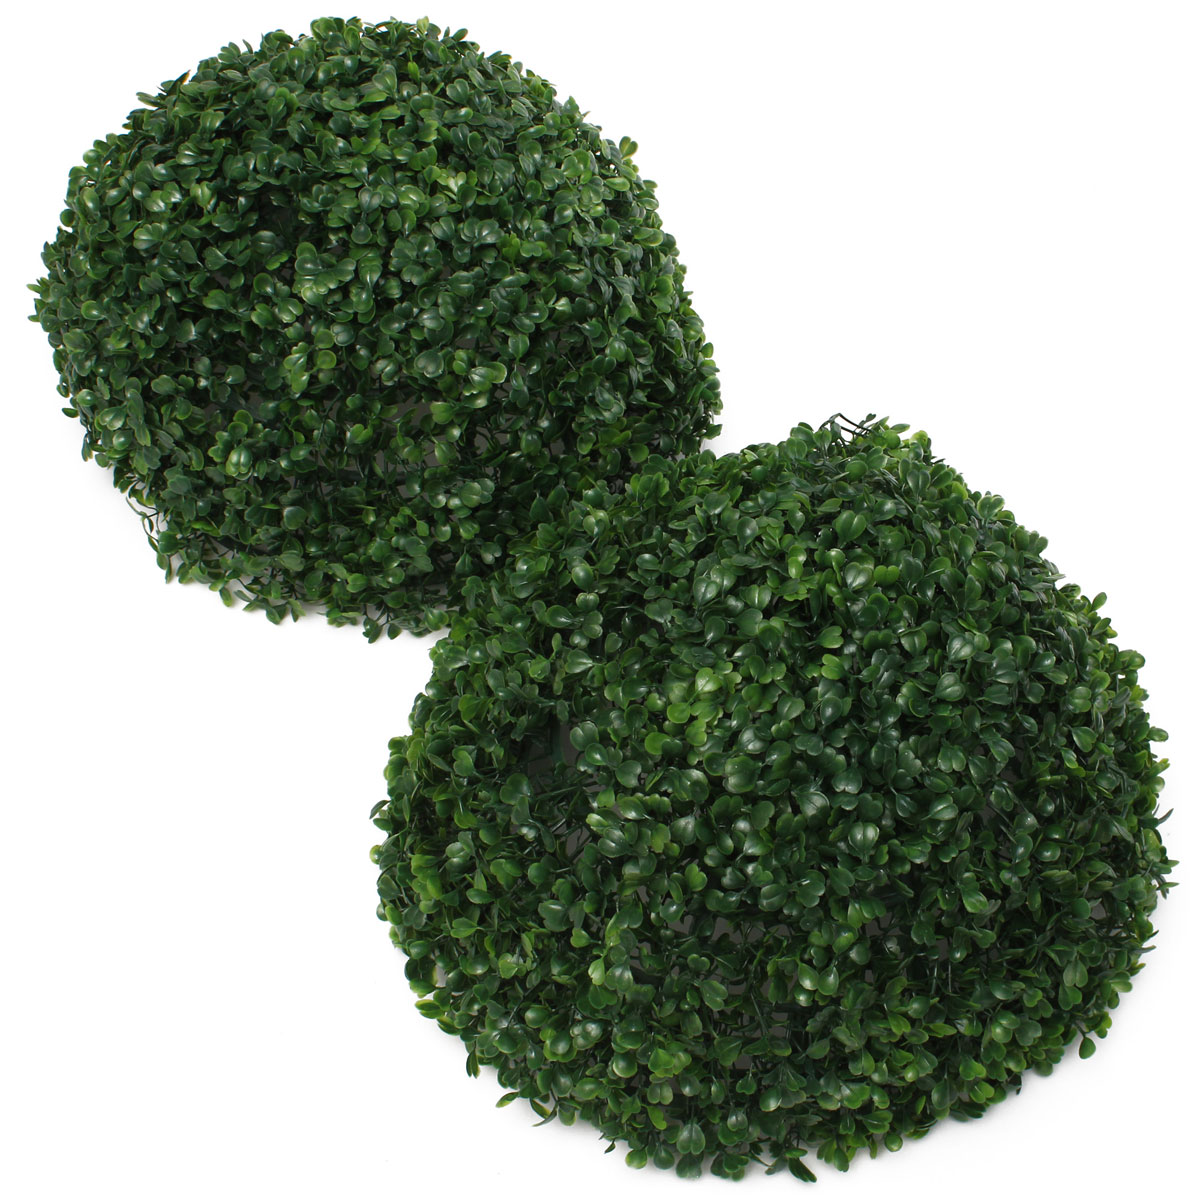 35cm-Plastic-Artificial-Topiary-Grass-Ball-Leaf-Effect-Ball-Wedding-Gardening-Hanging-Decoration-1036994-6